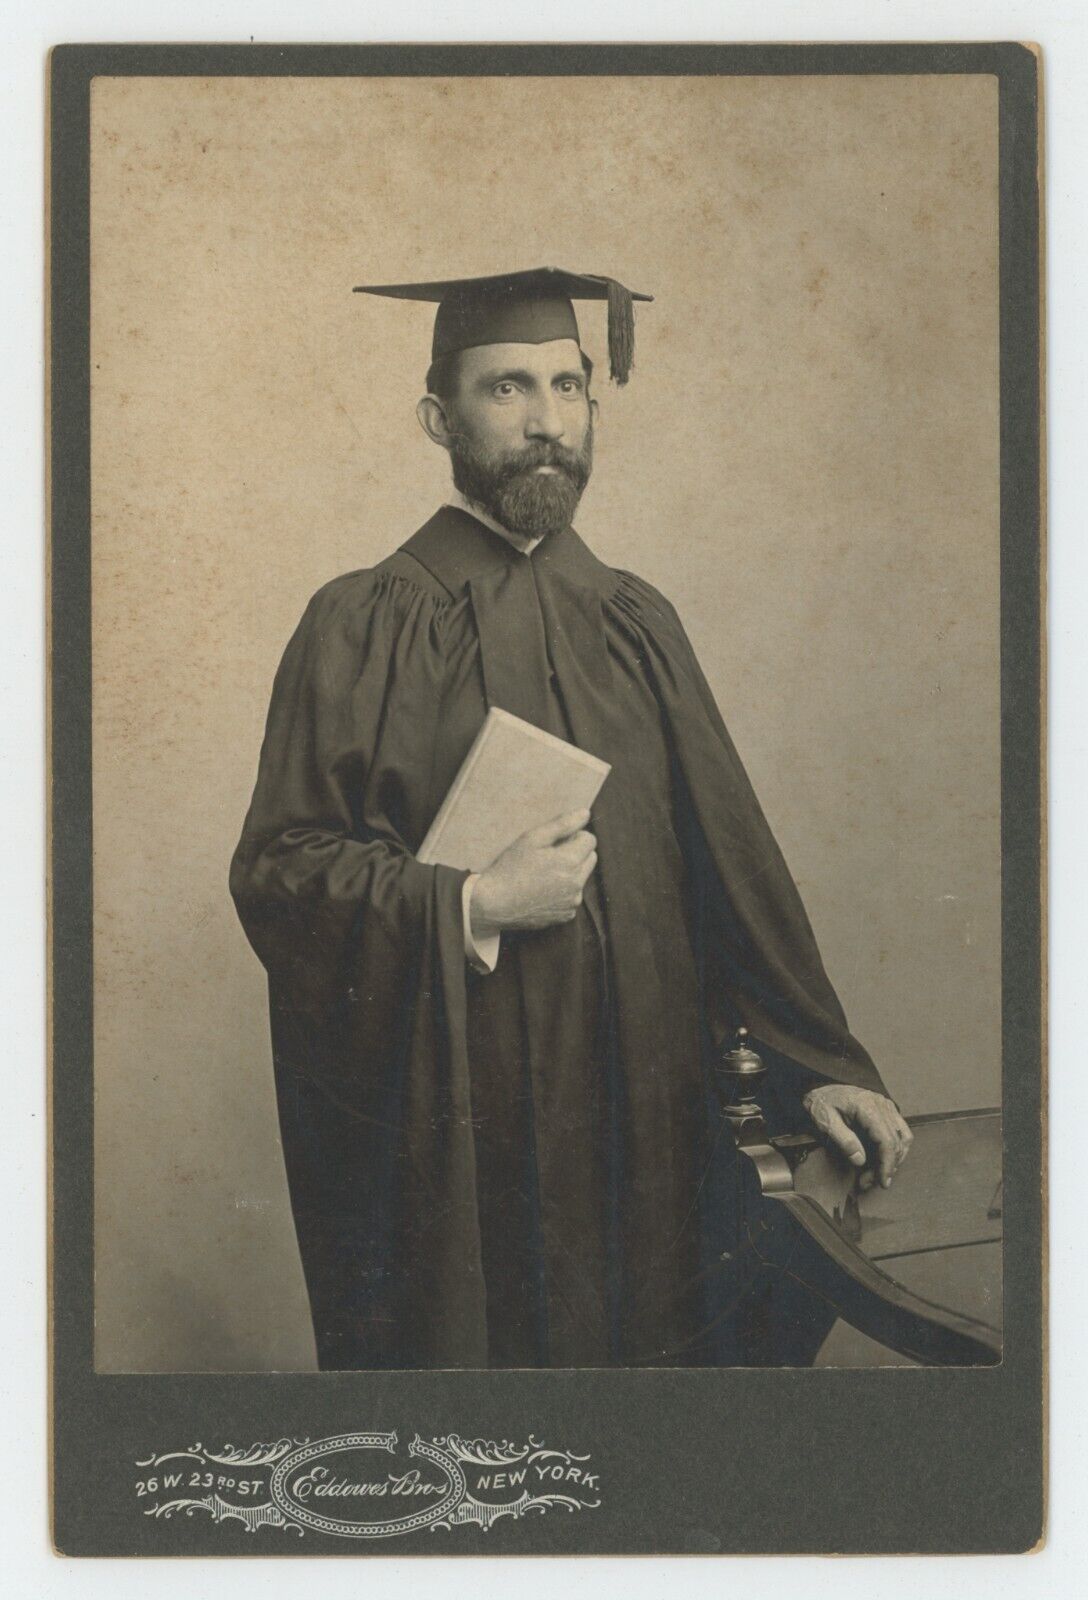 Antique c1890s Cabinet Card Man With Beard Graduation Robe Mortarboard New York